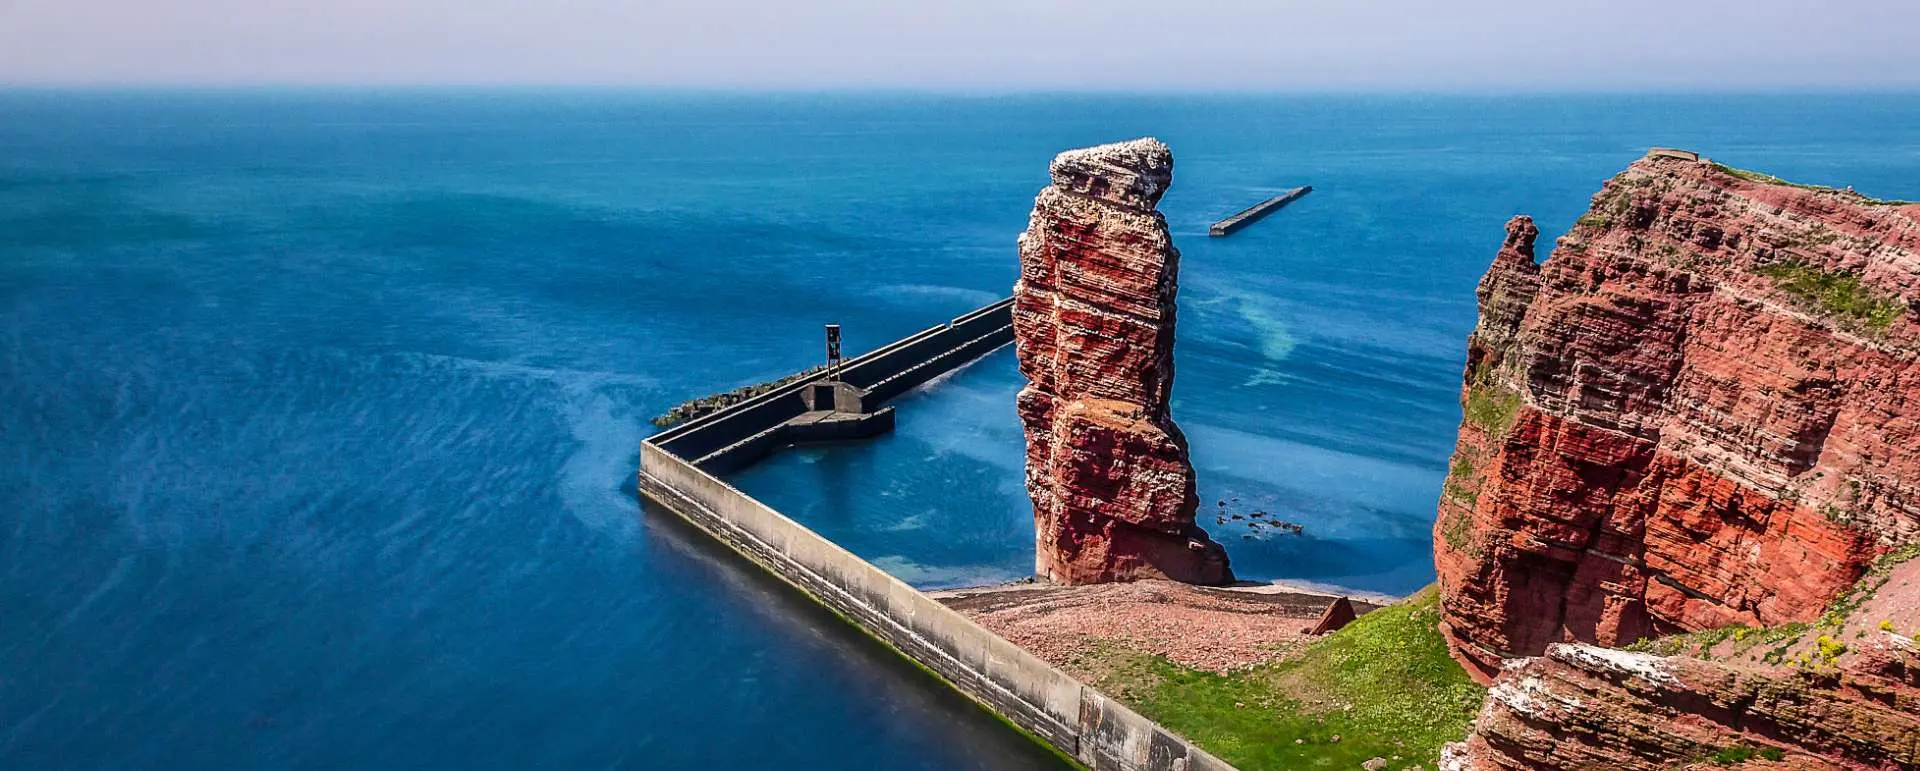 Heligoland - Top incentive travel hotels for rewarding experiences